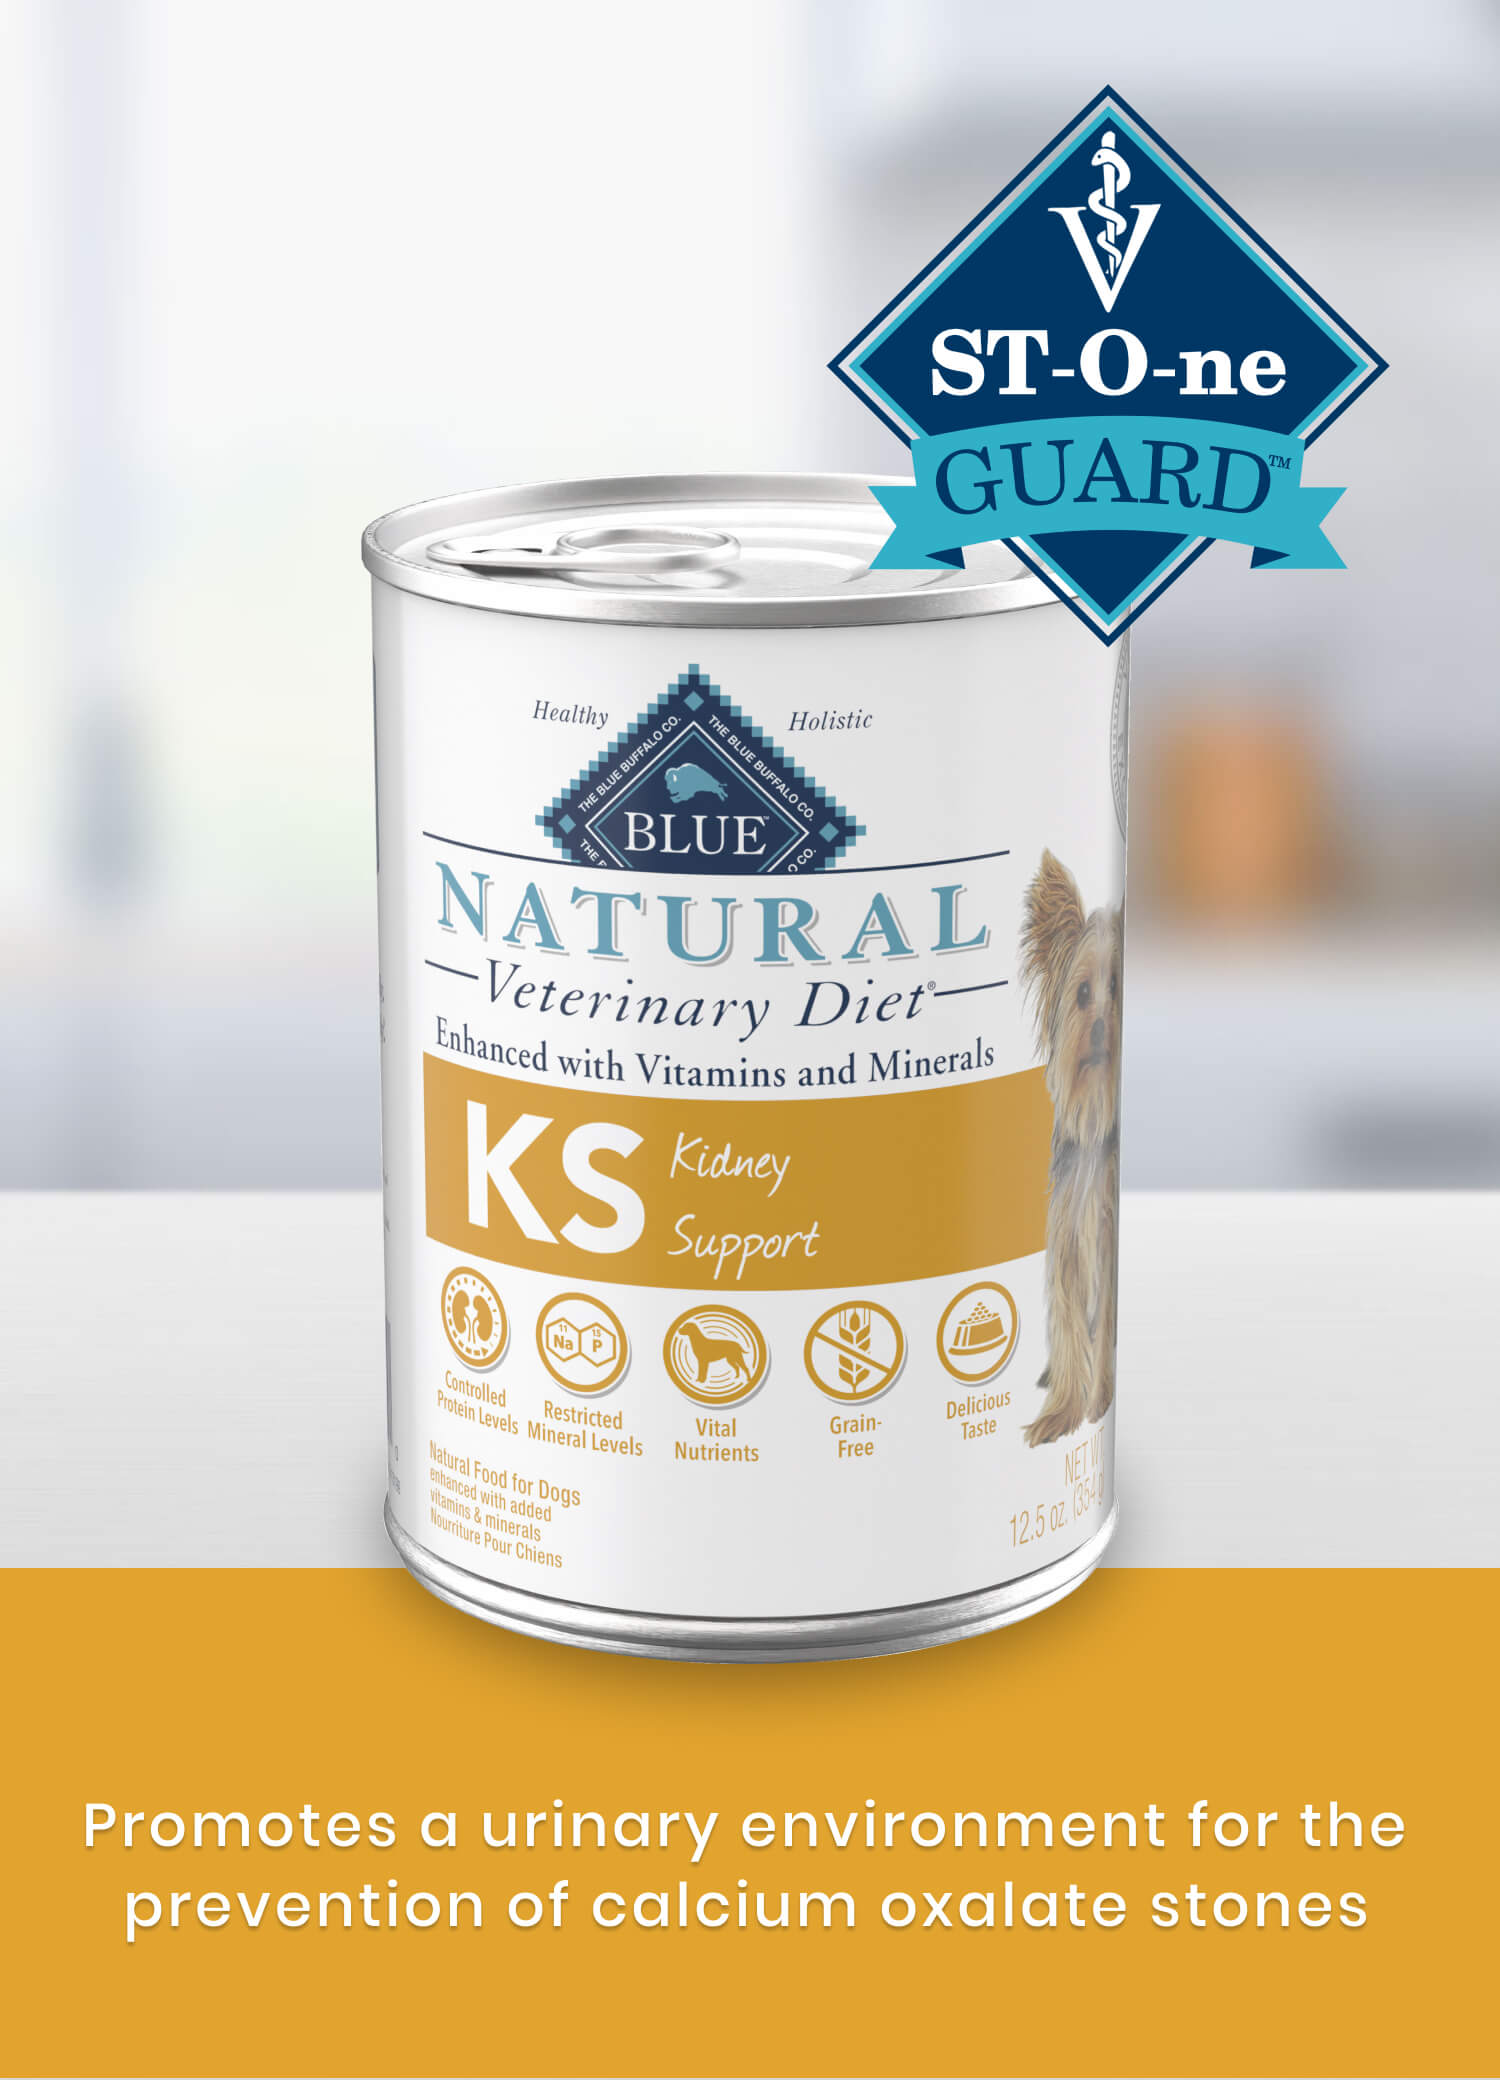 KS Kidney Support St-O-ne Guard Promotes a urinary environment for the prevention of calcium oxalate stones